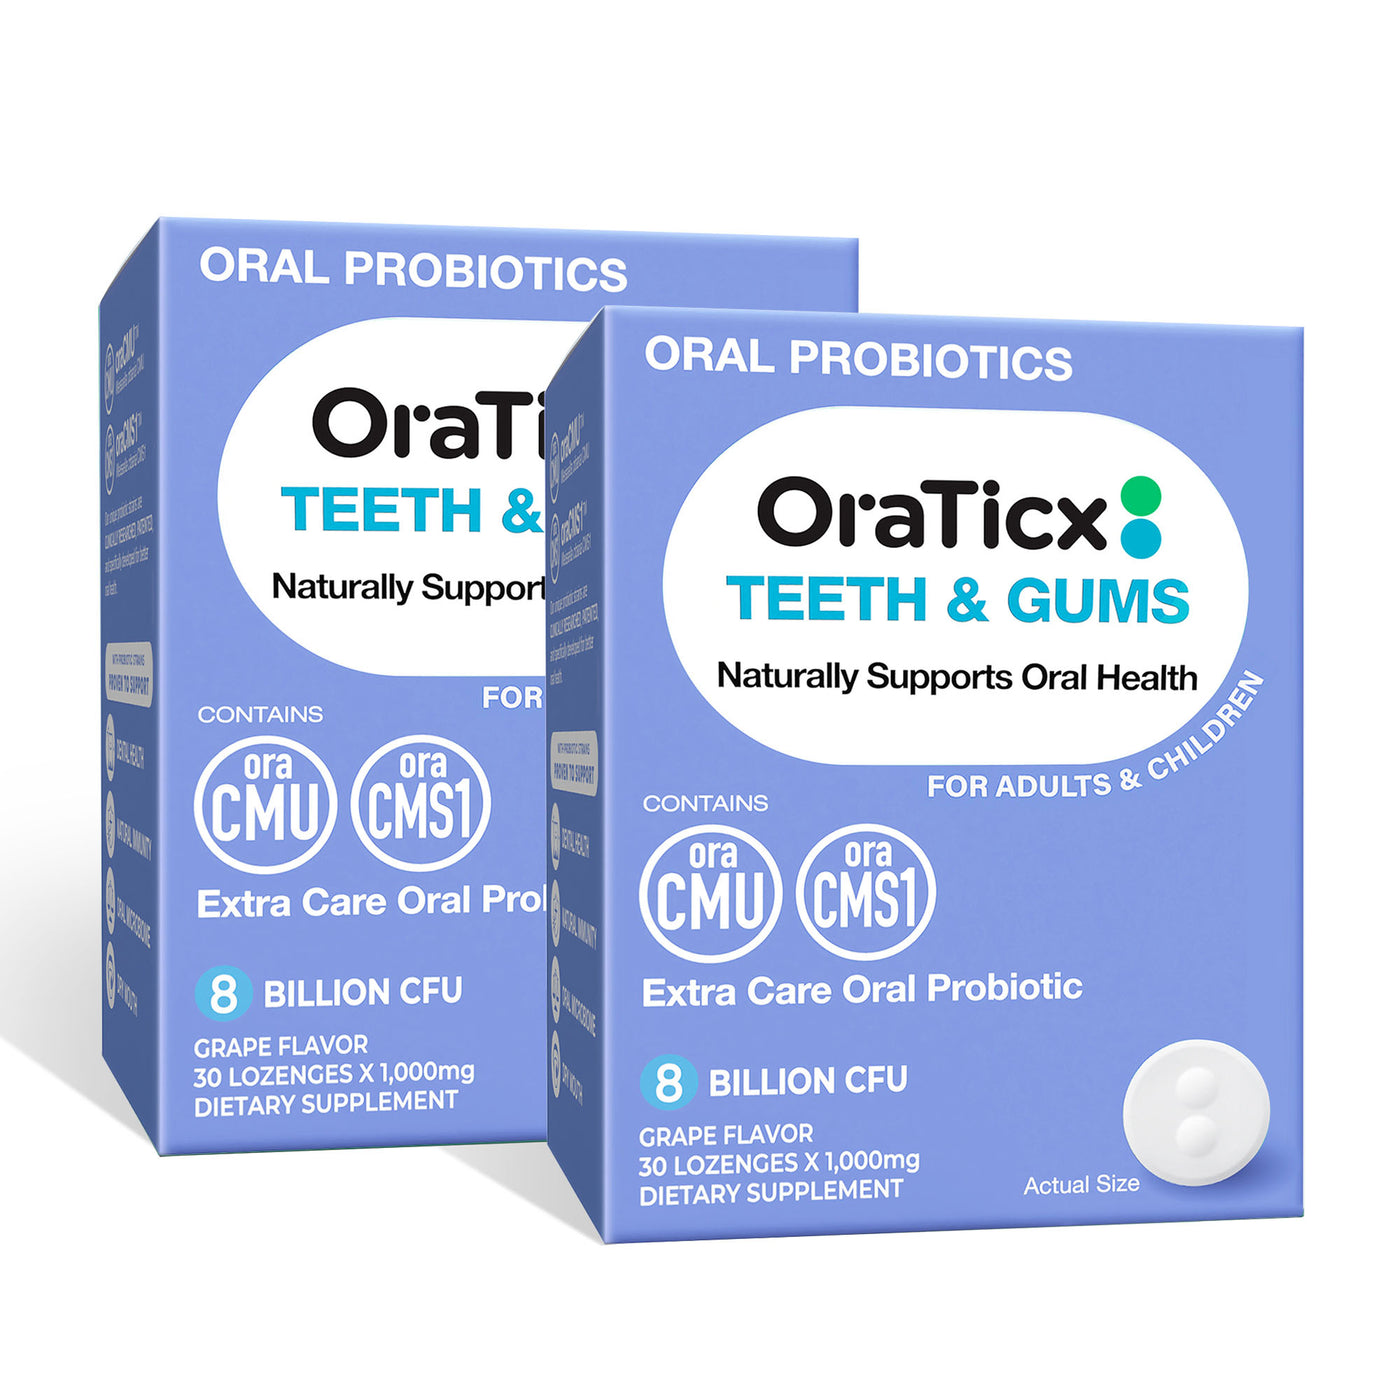 OraTicx Teeth & Gums help replace harmful microbes to restore the balance between oral microbime